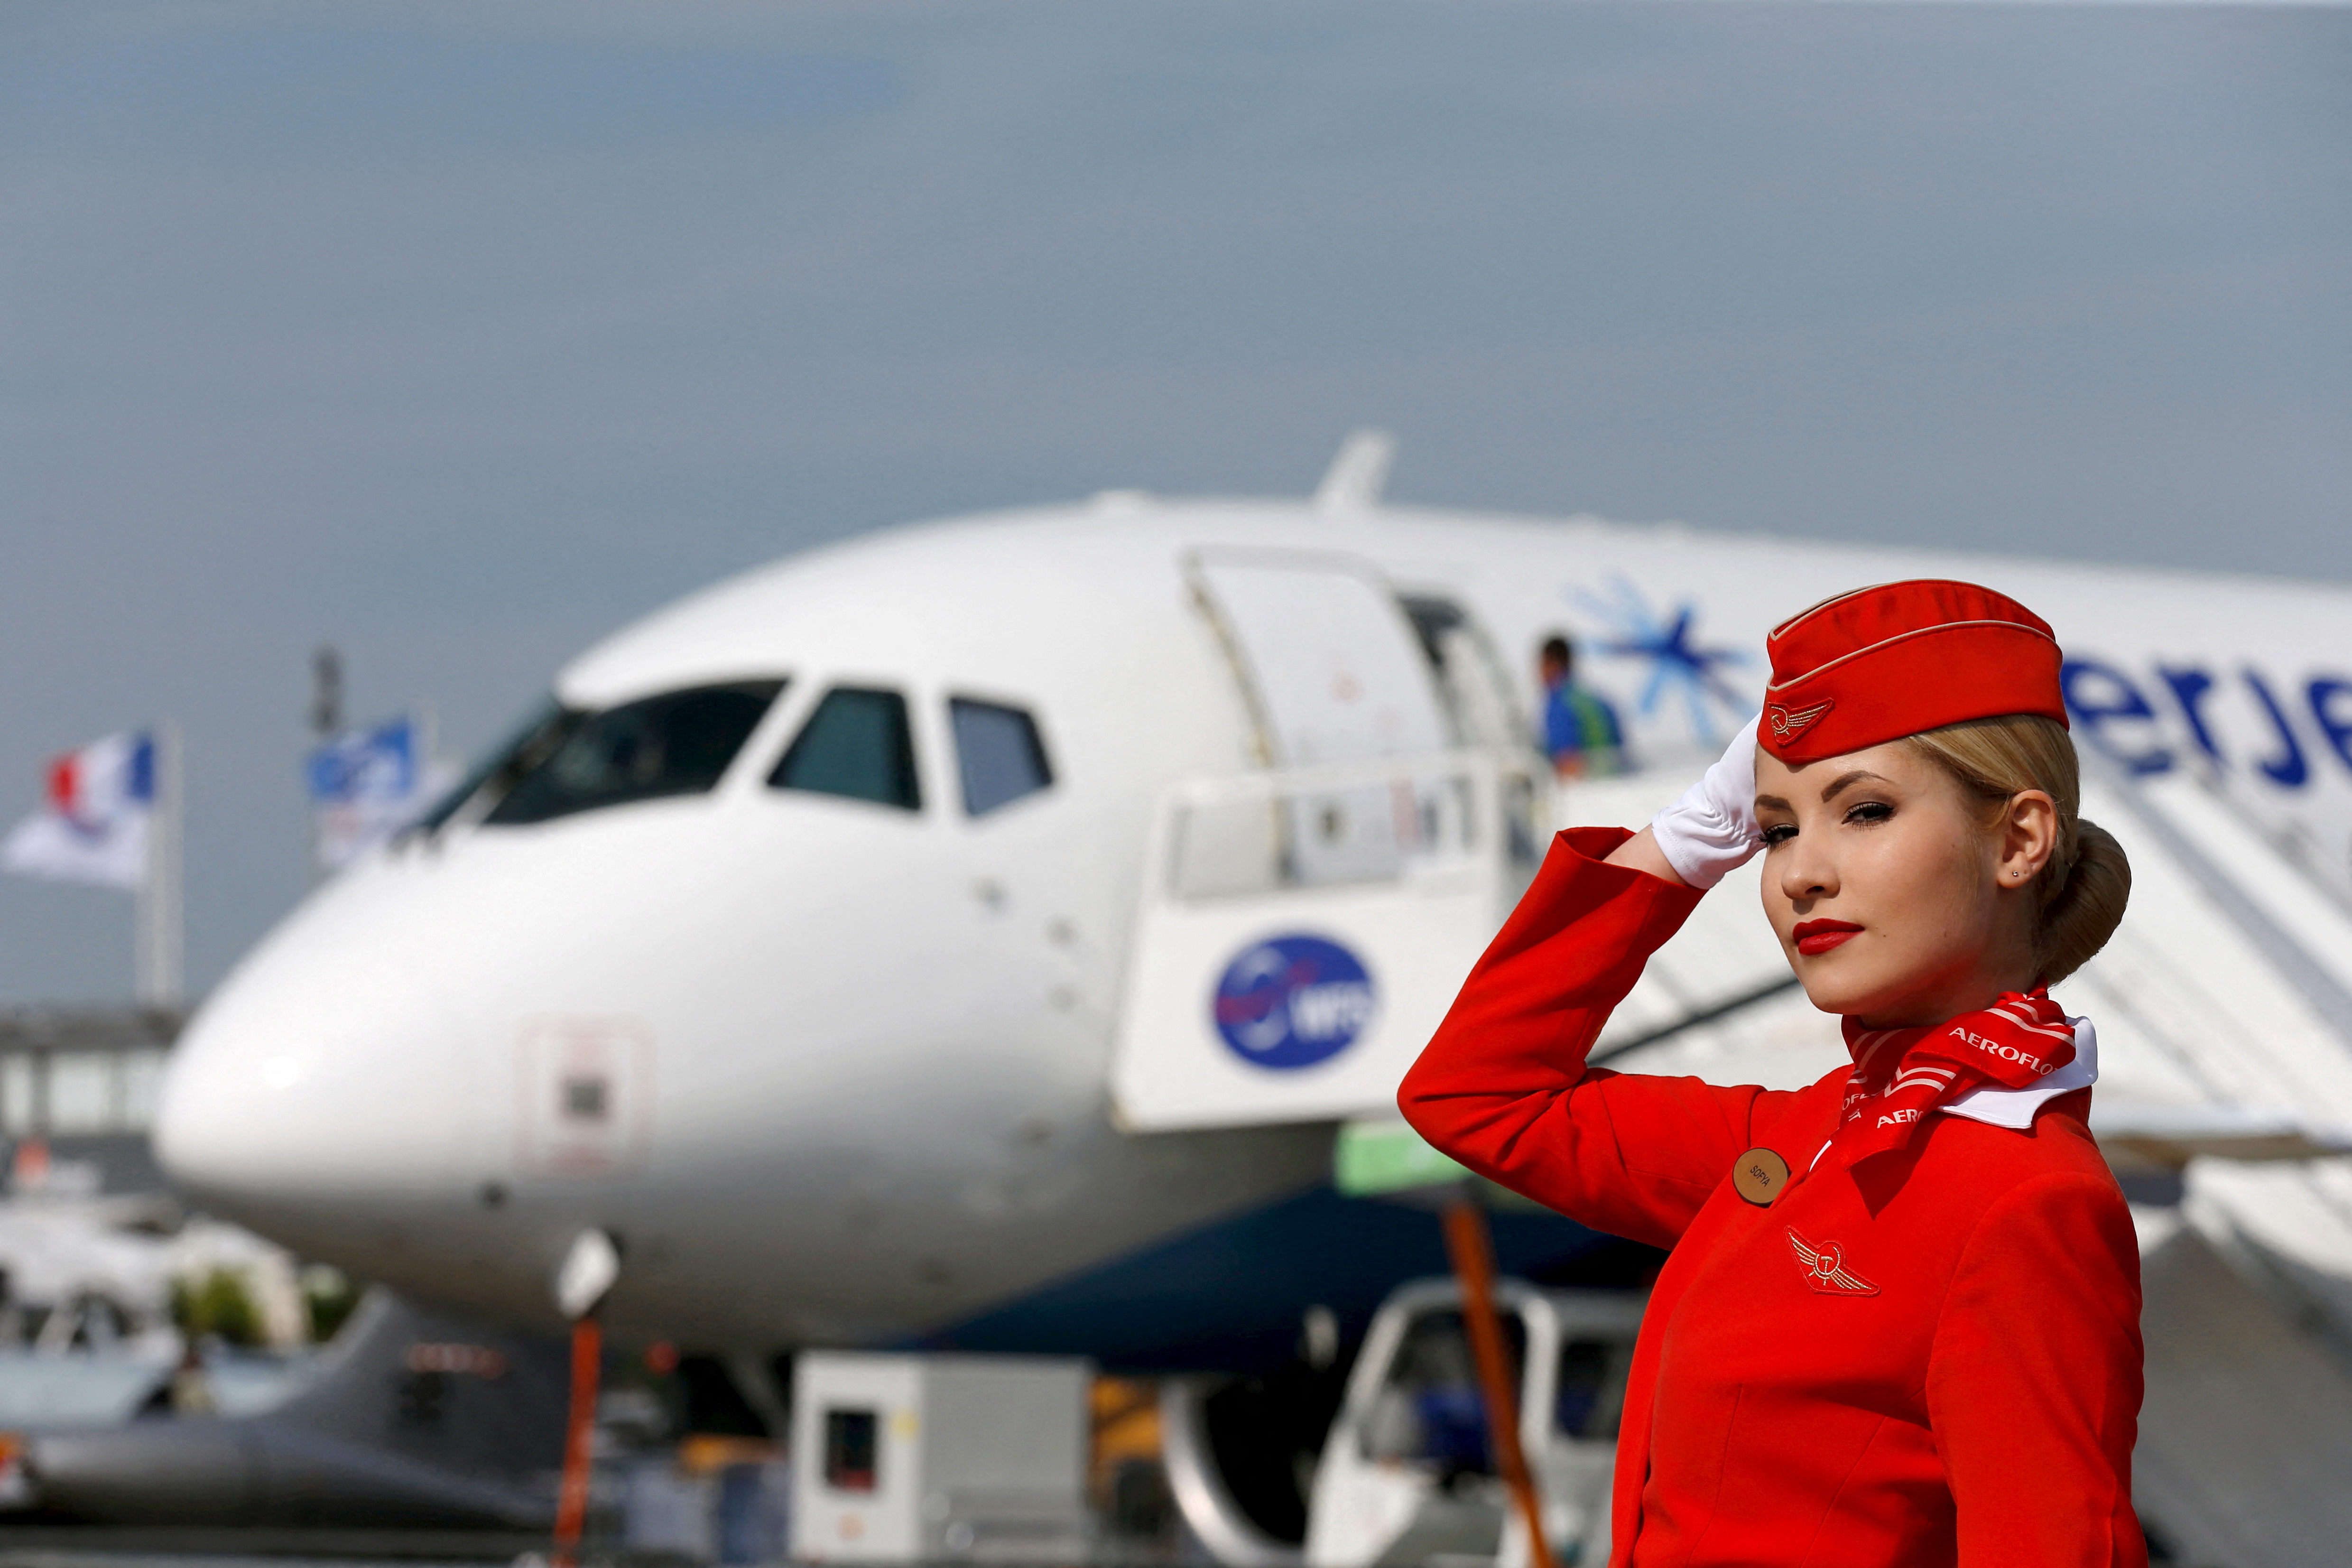 Cabin crew member of Russian carrier Aeroflot poses in front of a Sukhoi Superjet 100 airplane during a photo session at the 51st Paris Air Show at Le Bourget airport near Paris